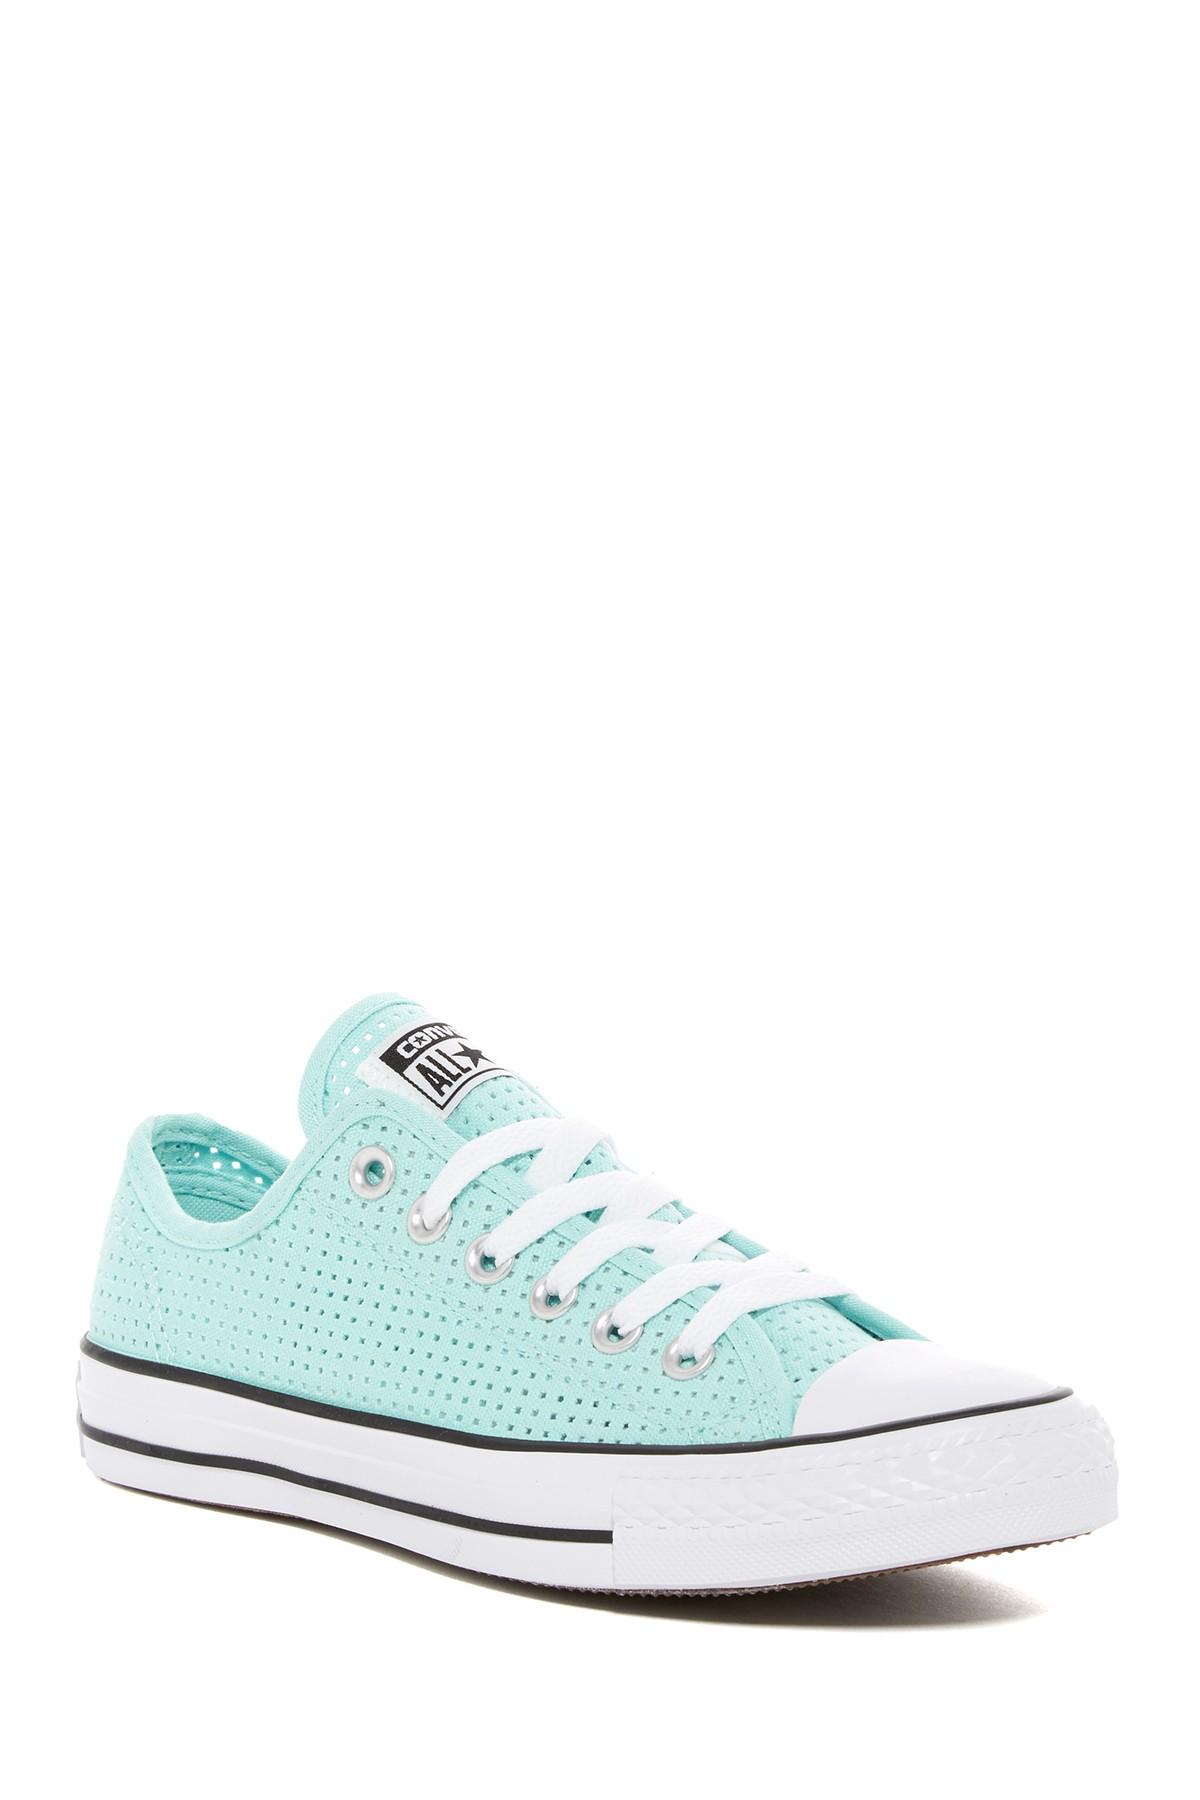 Converse Chuck Taylor All Star Ox Perforated Canvas Sneaker (women) - Lyst